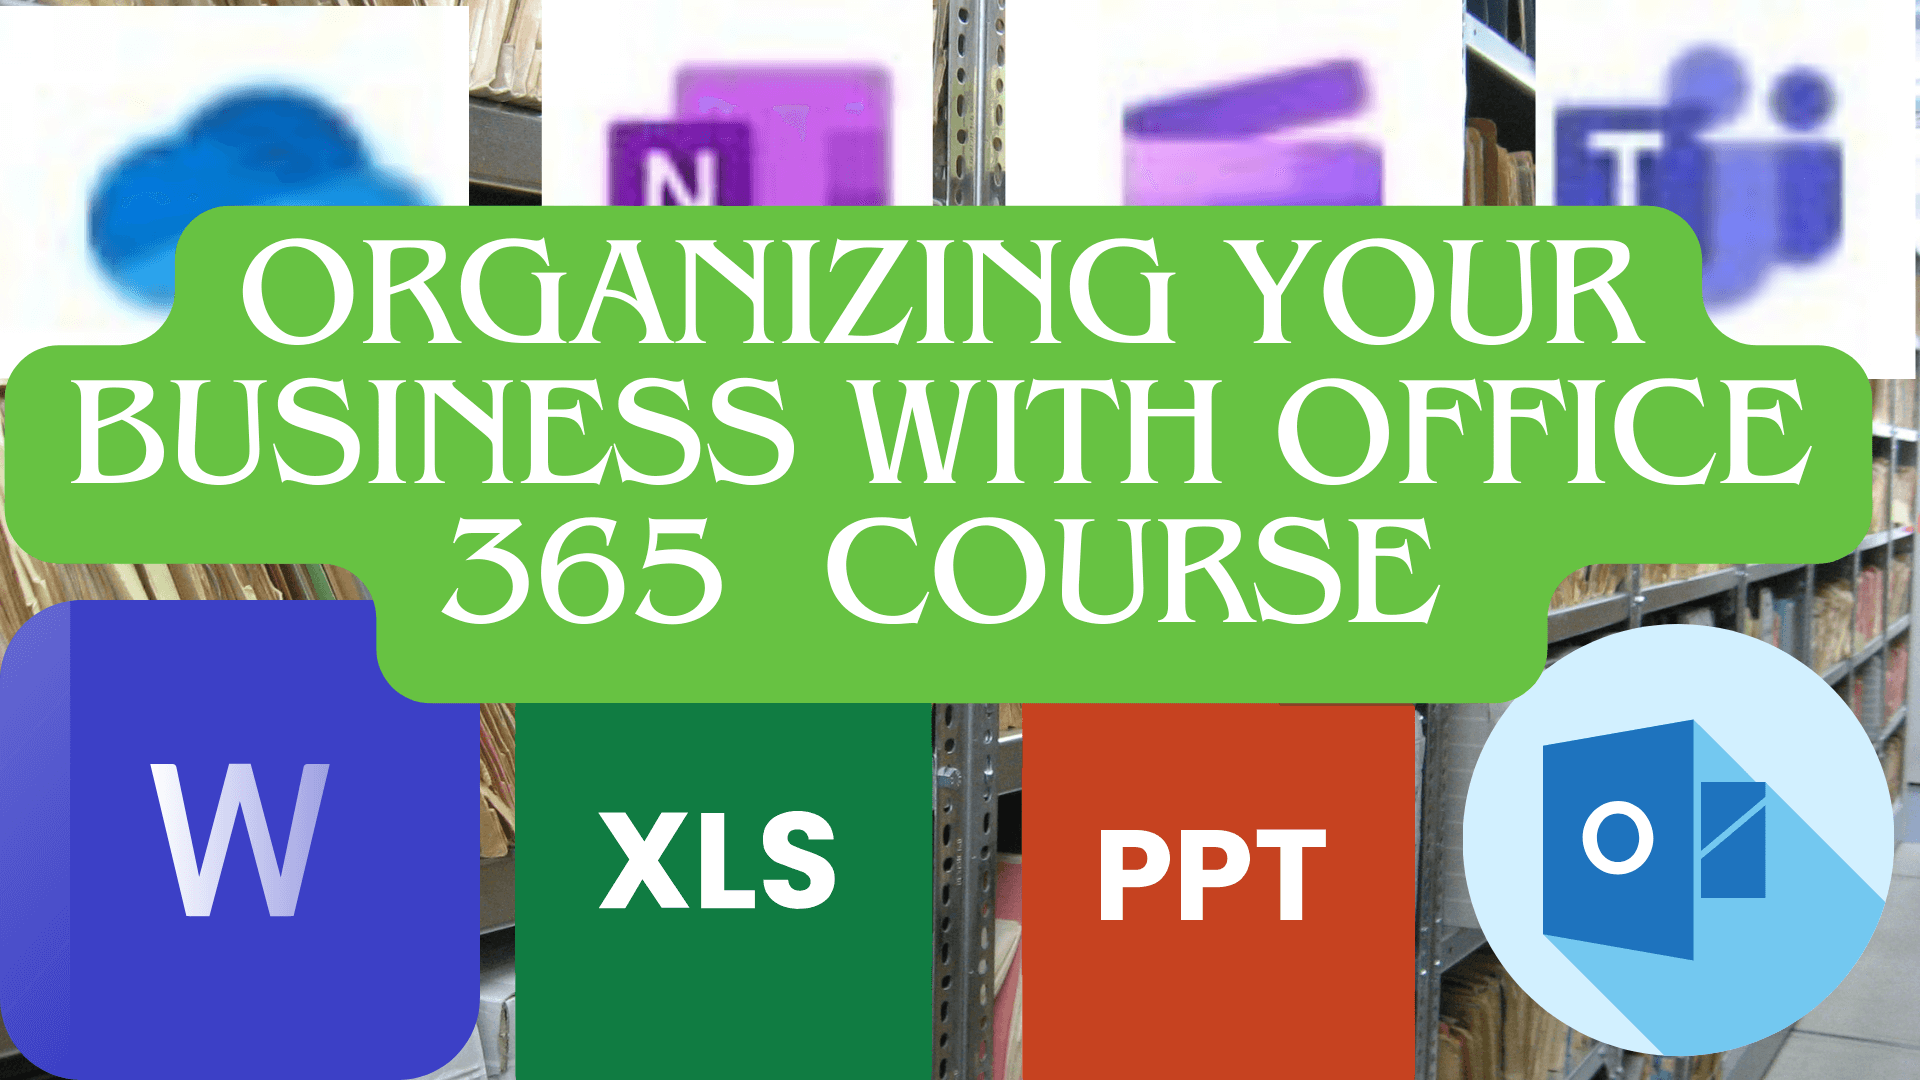 Organizing your business with Microsoft 365